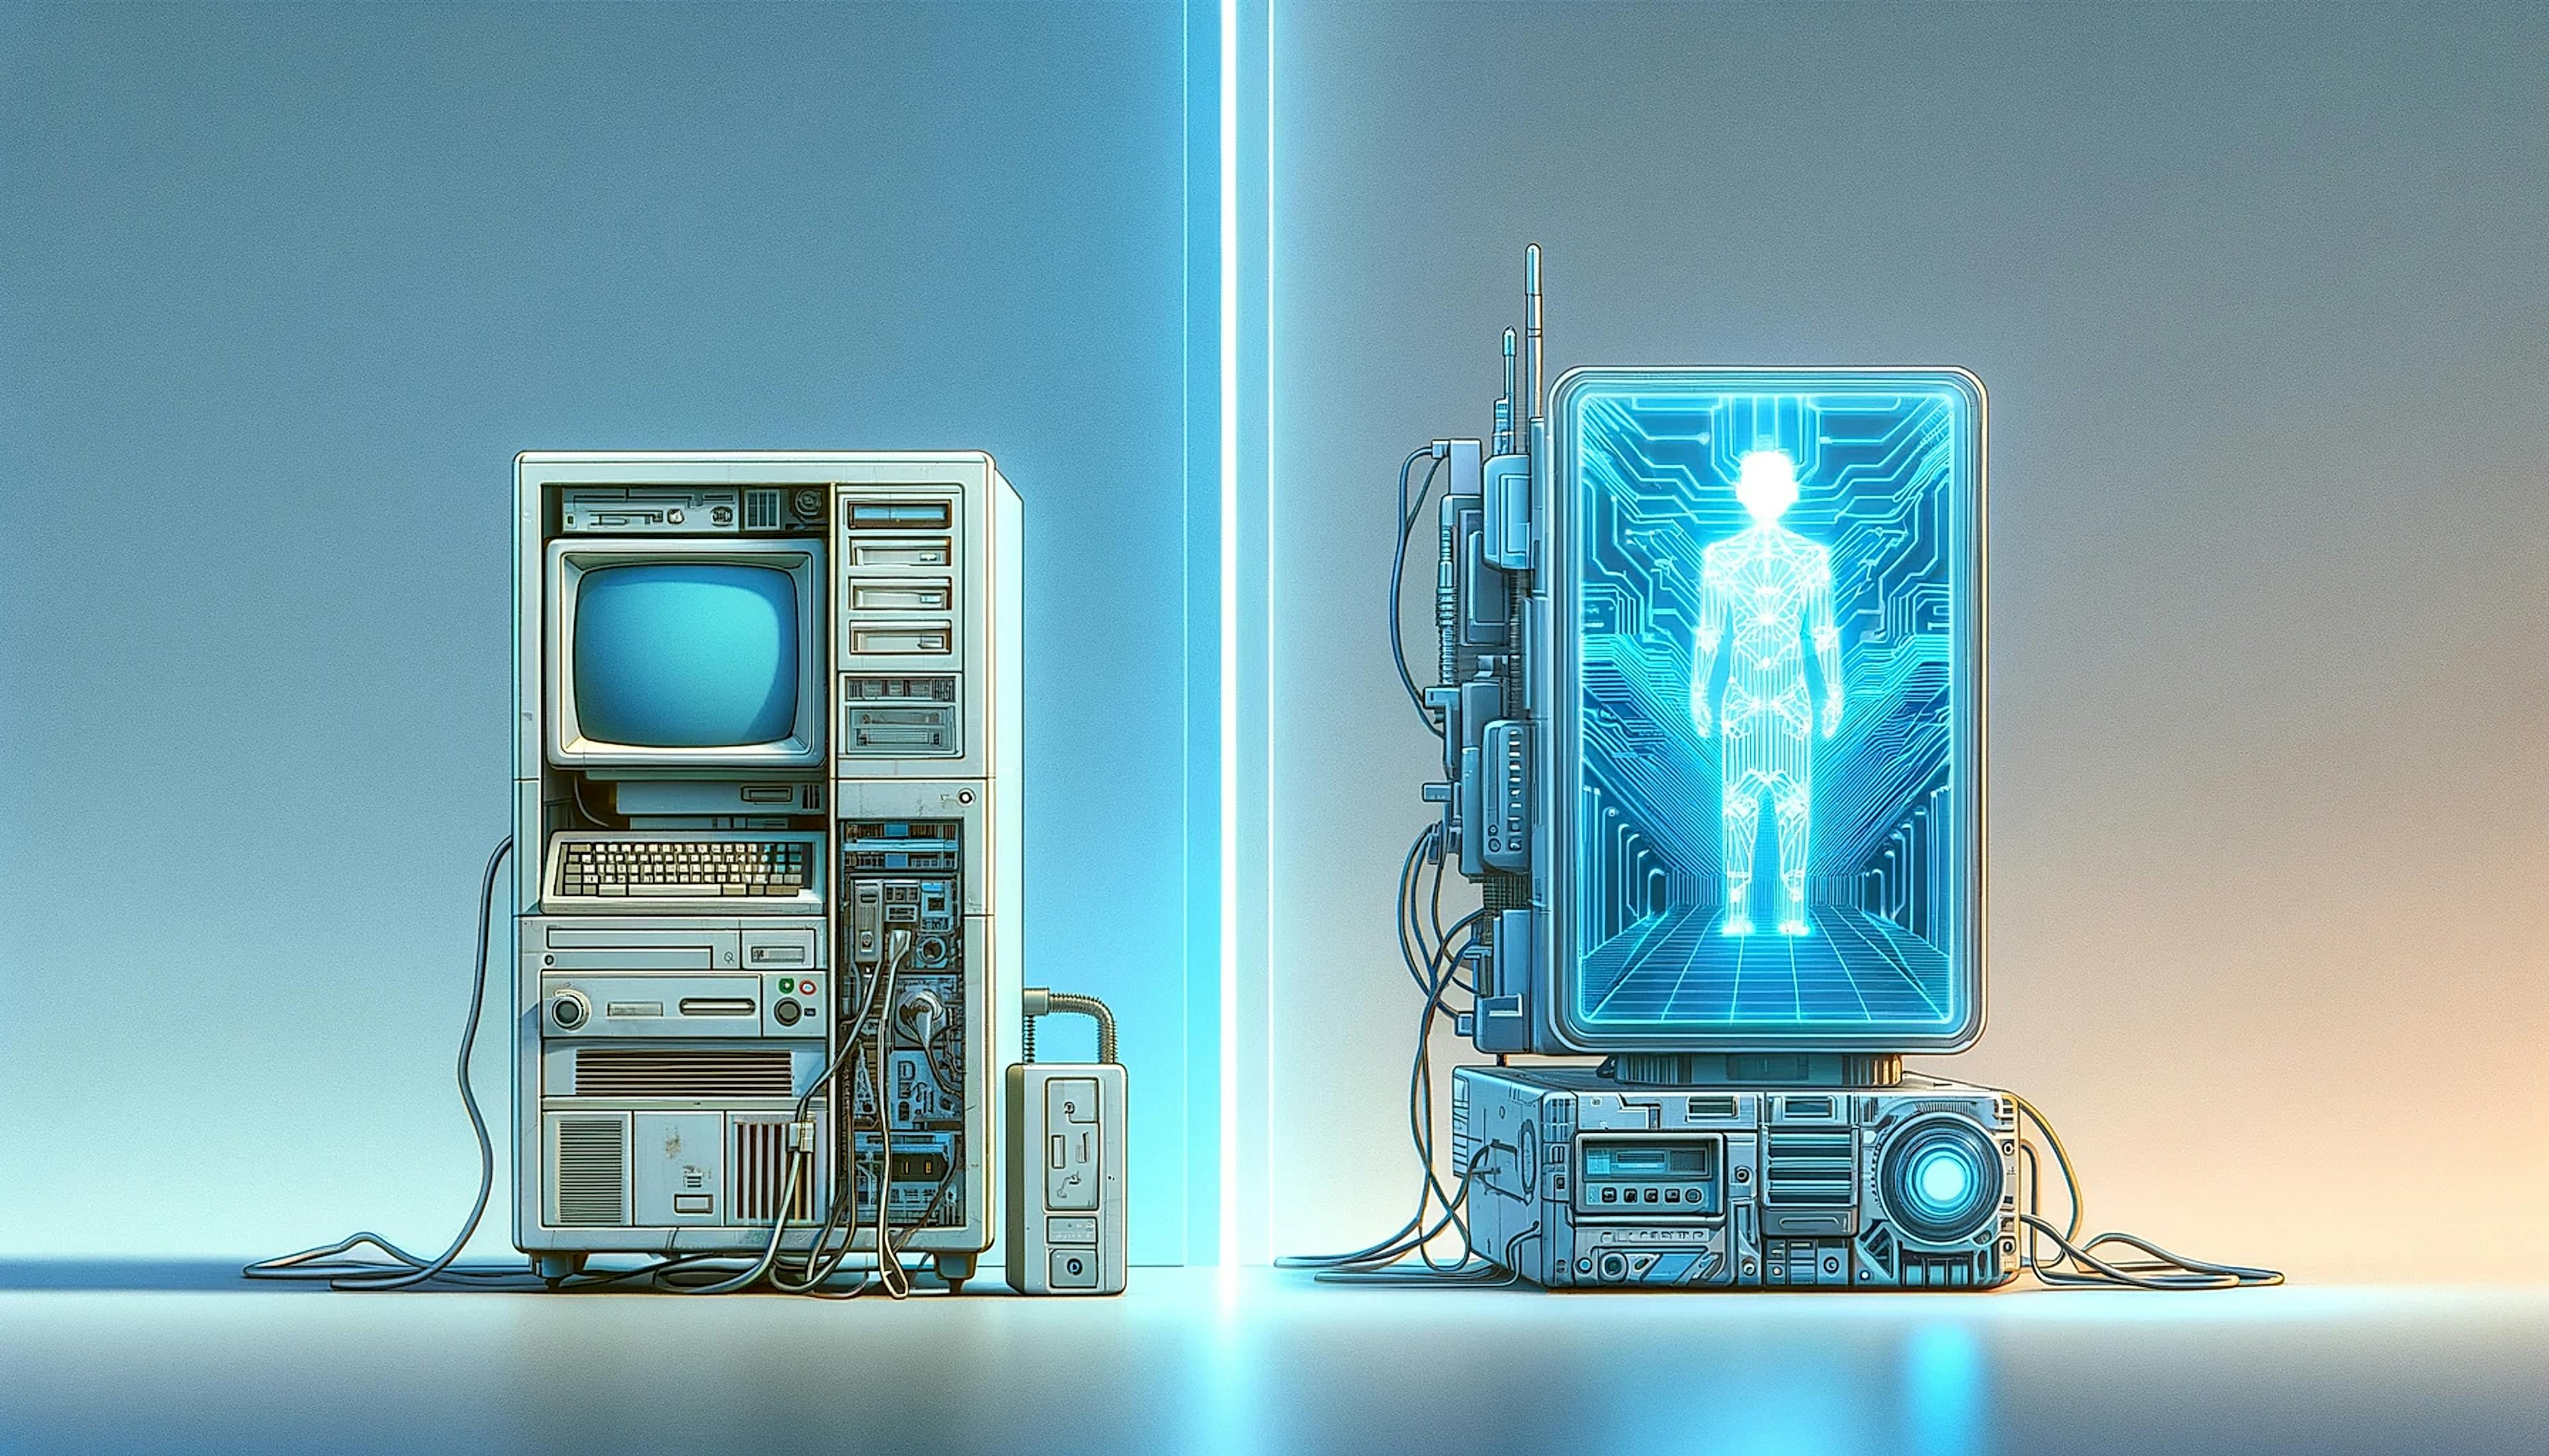 A divided image with an old-fashioned, bulky computer on the left and a sleek, modern AI interface with a holographic display on the right.